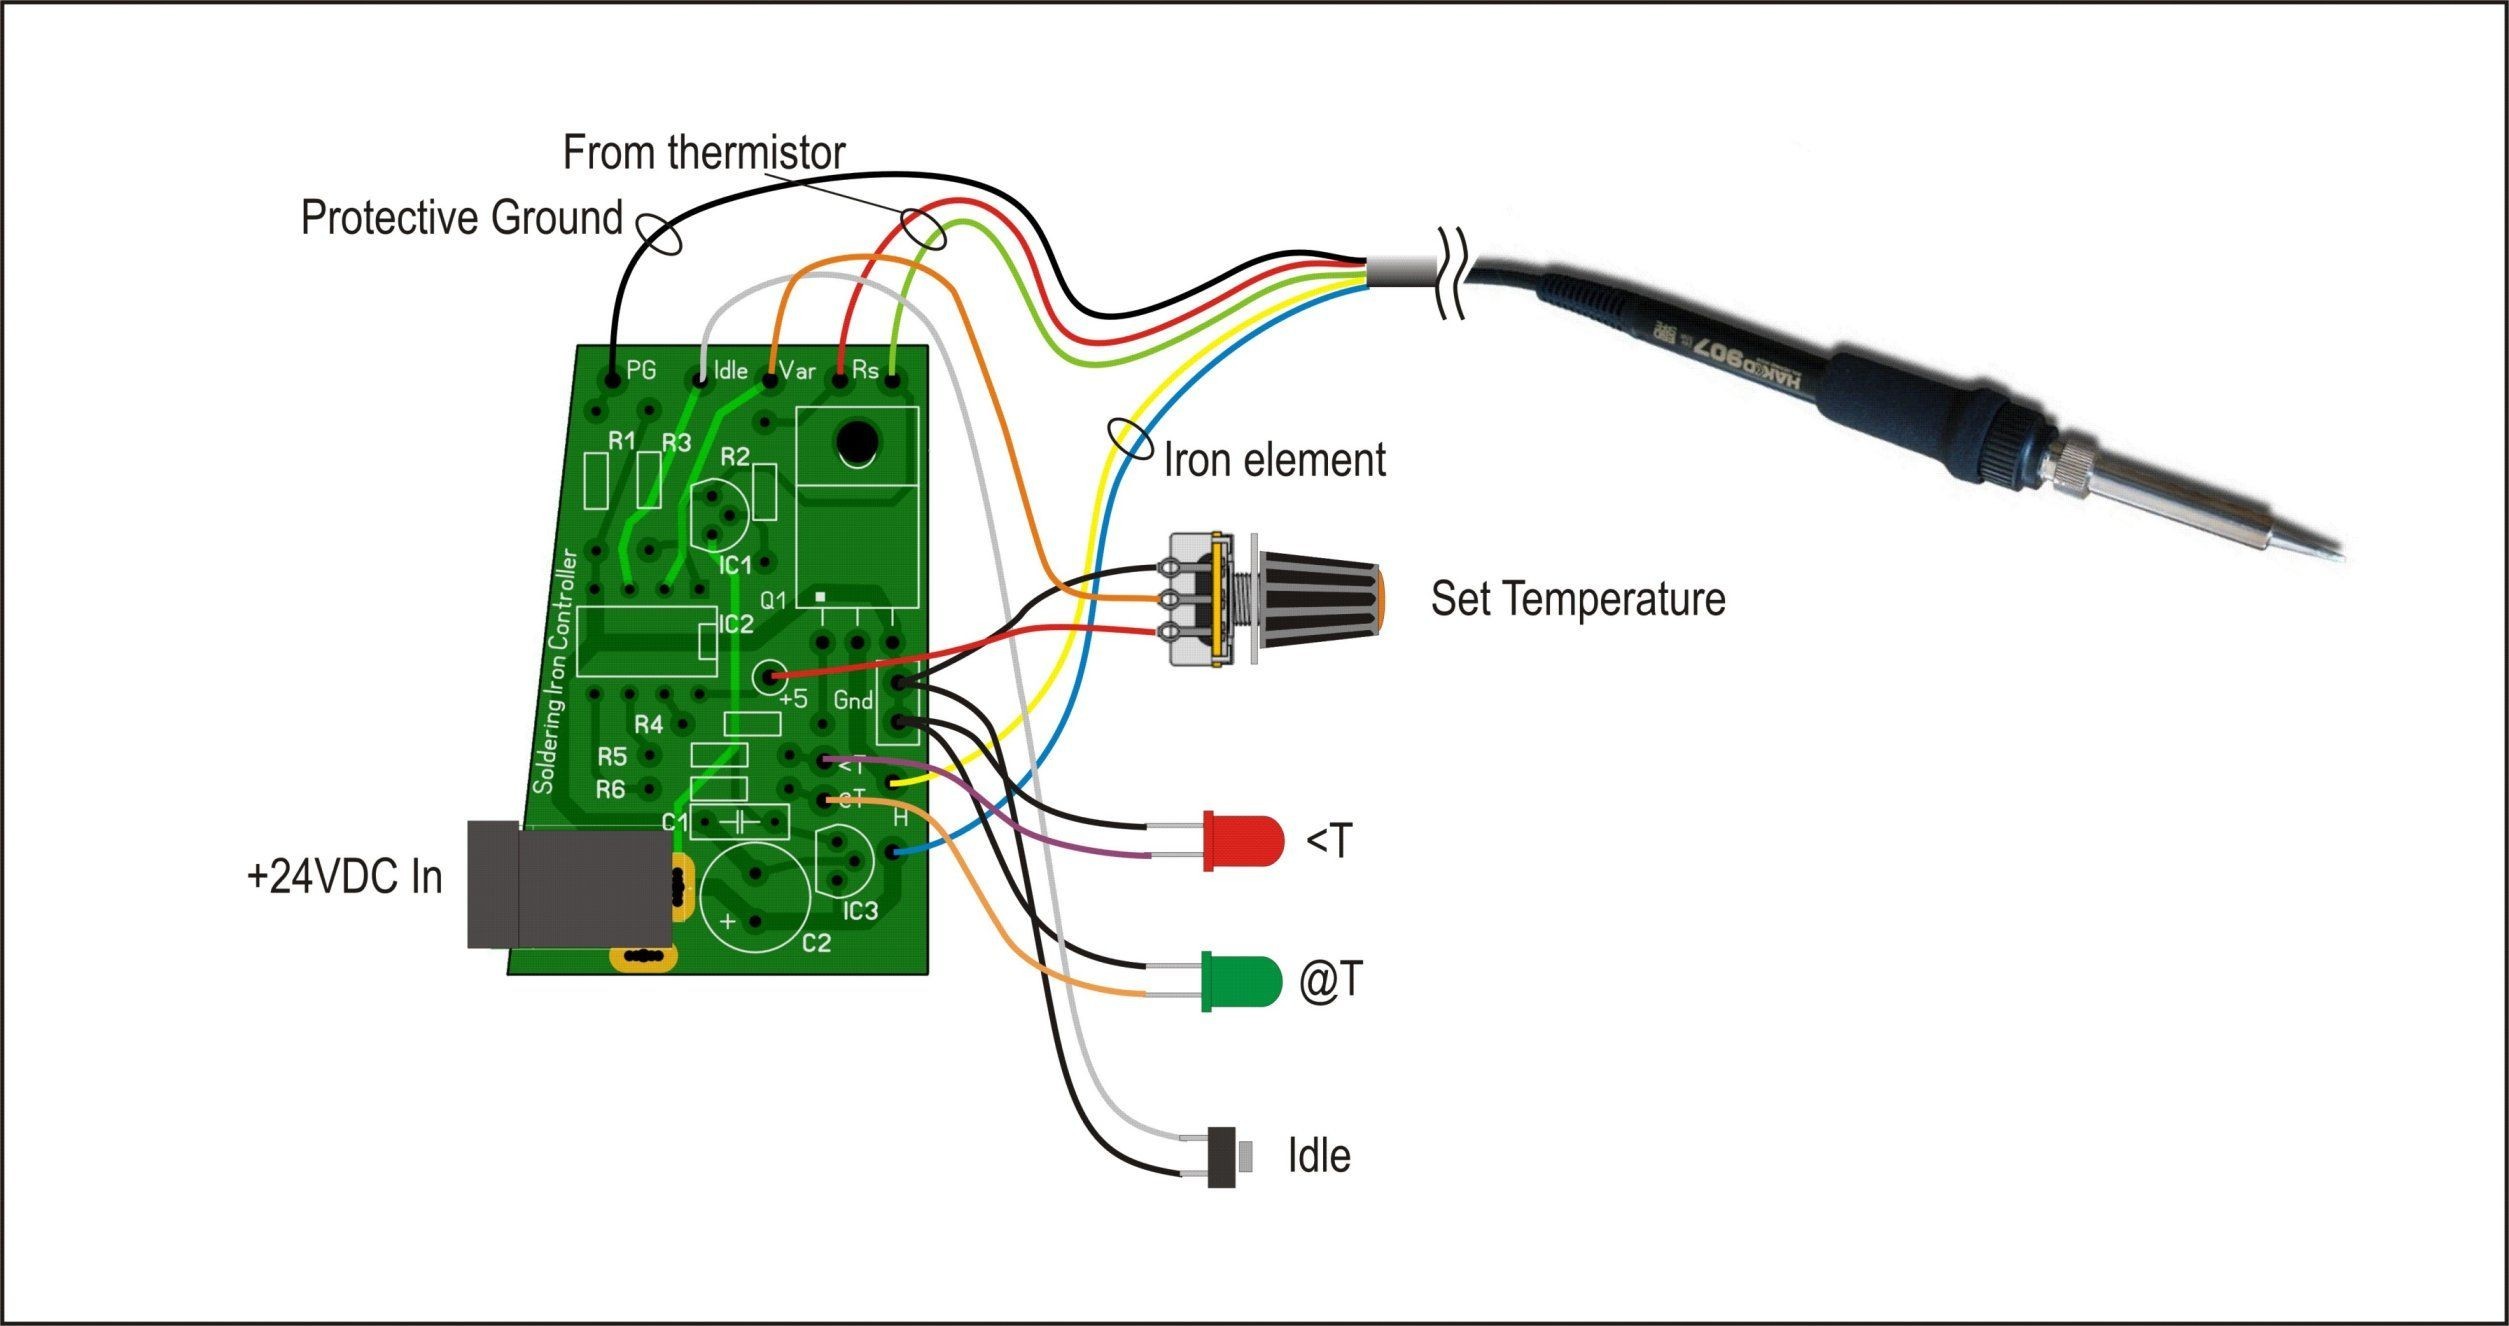 Wiring details for the soldering station